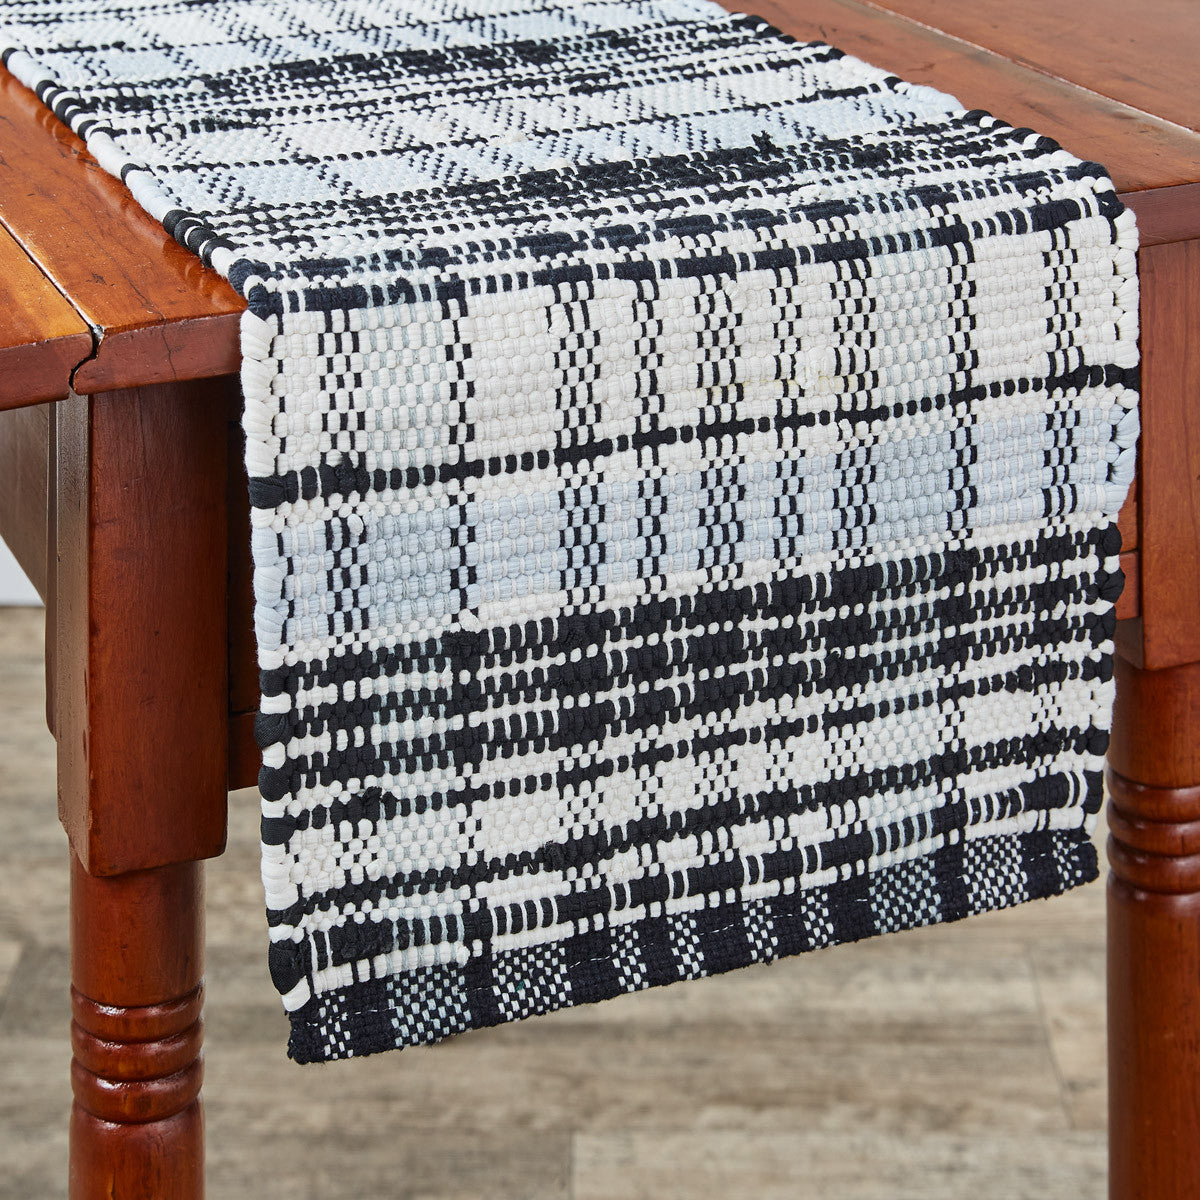 Refined Rustic Chindi Table Runner 54"L - Park Designs